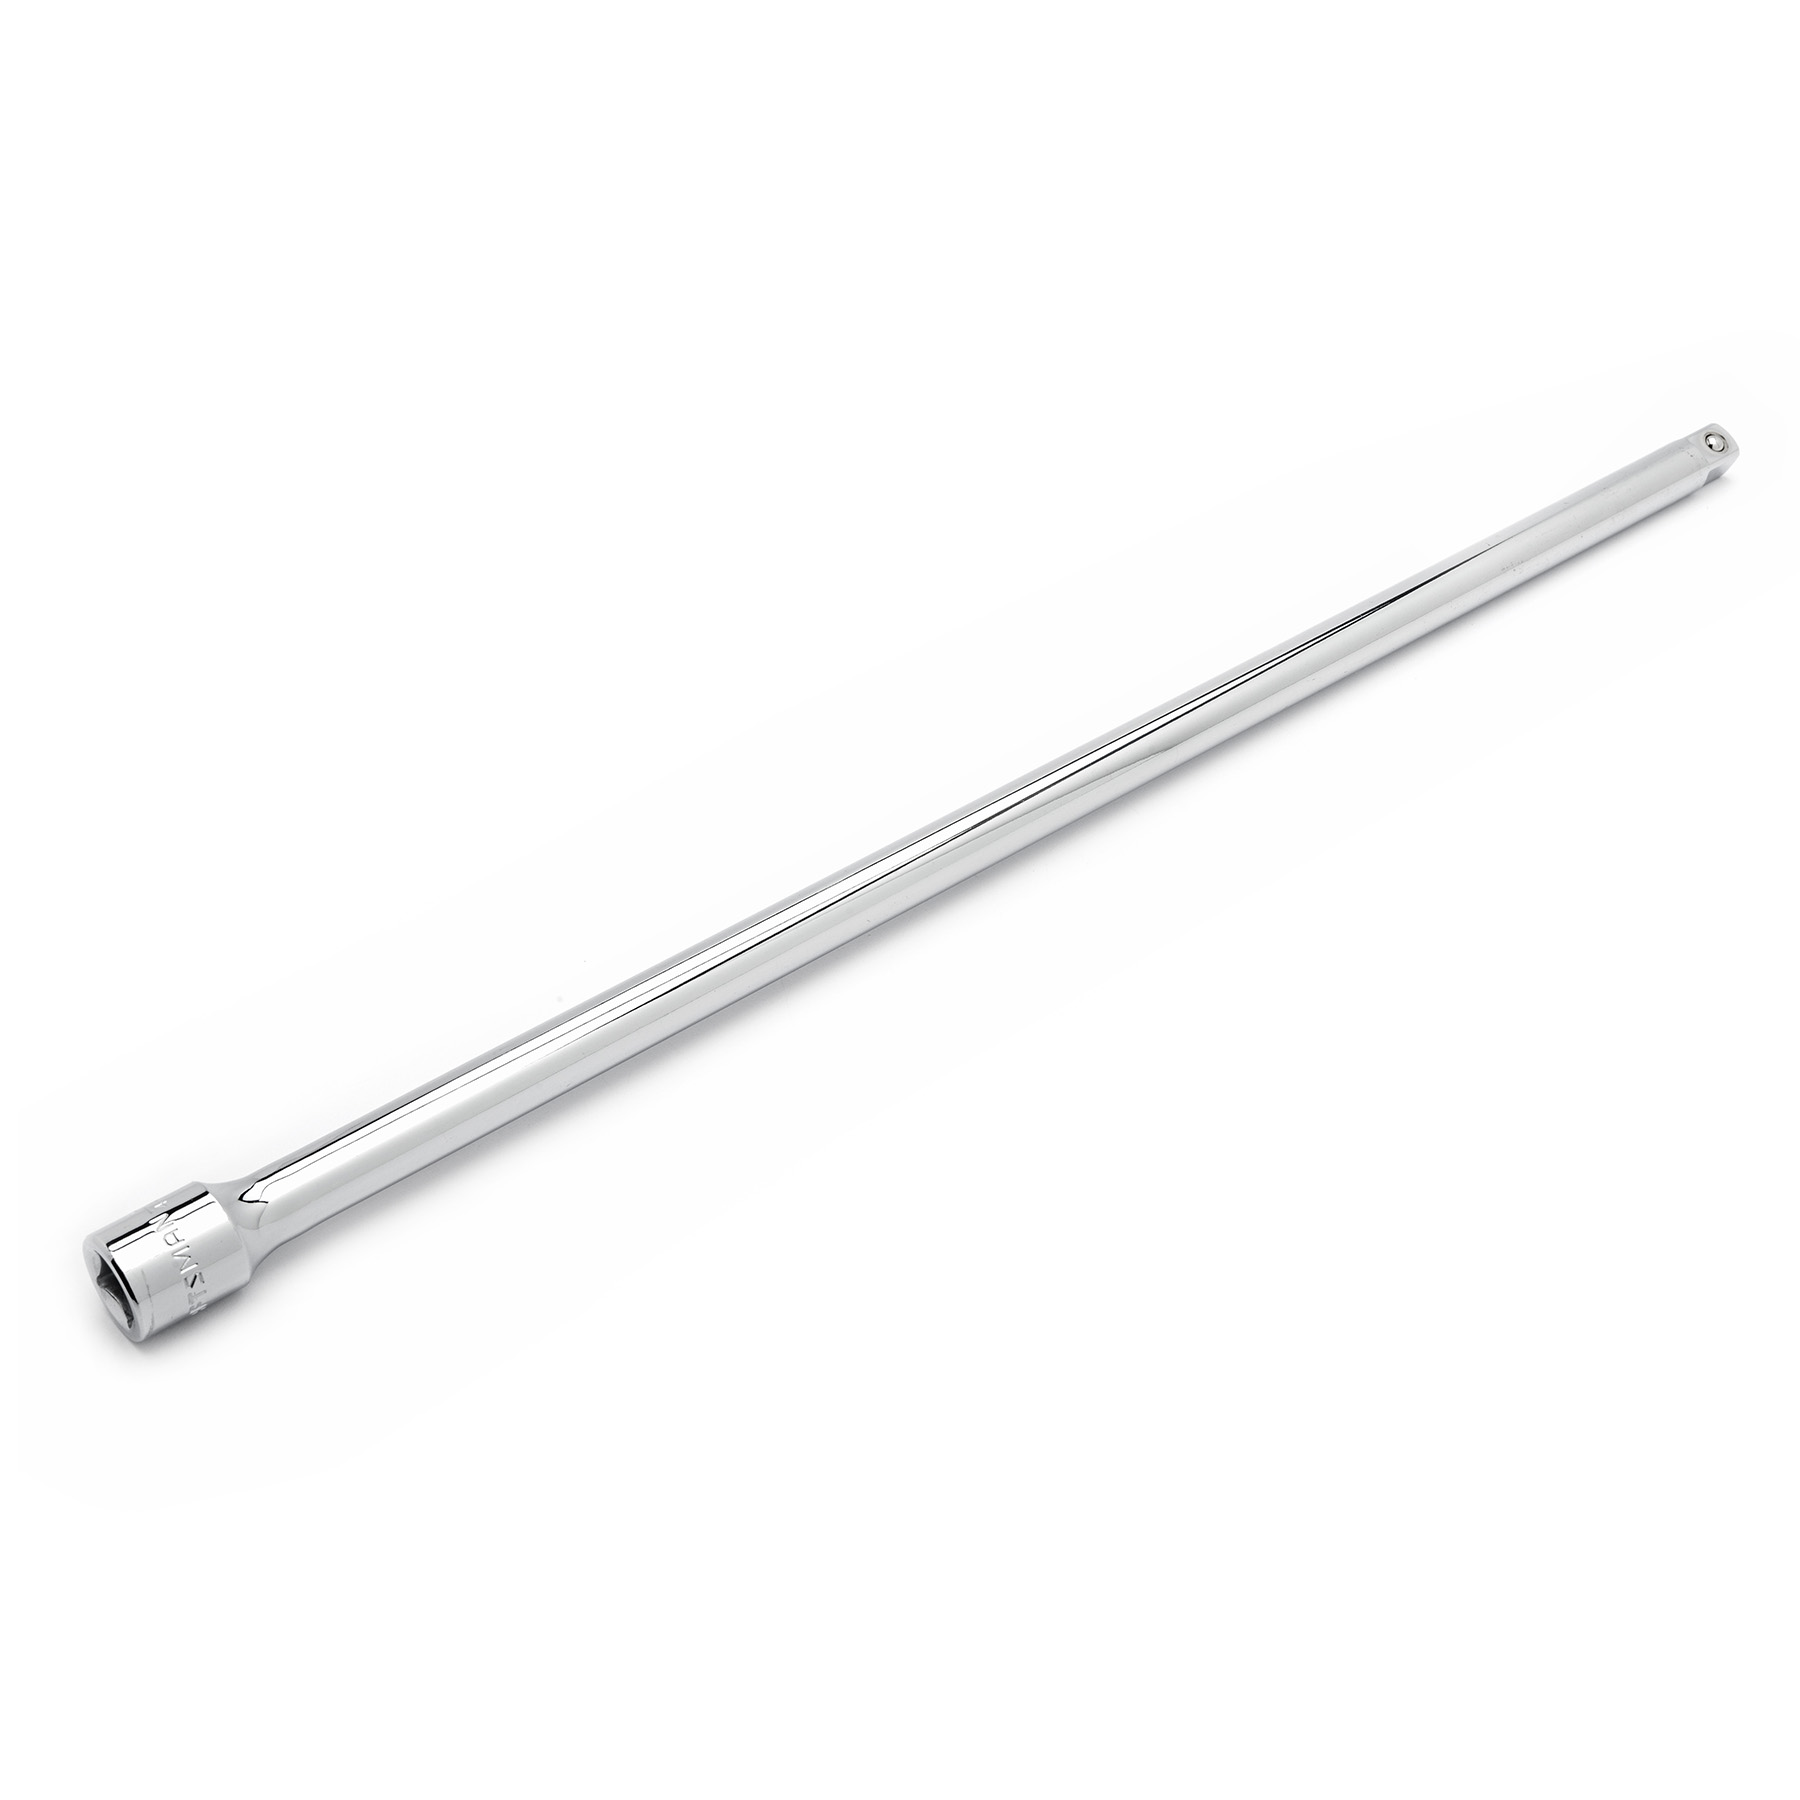 Craftsman 20 in. 1/2 in. Drive Extension Bar